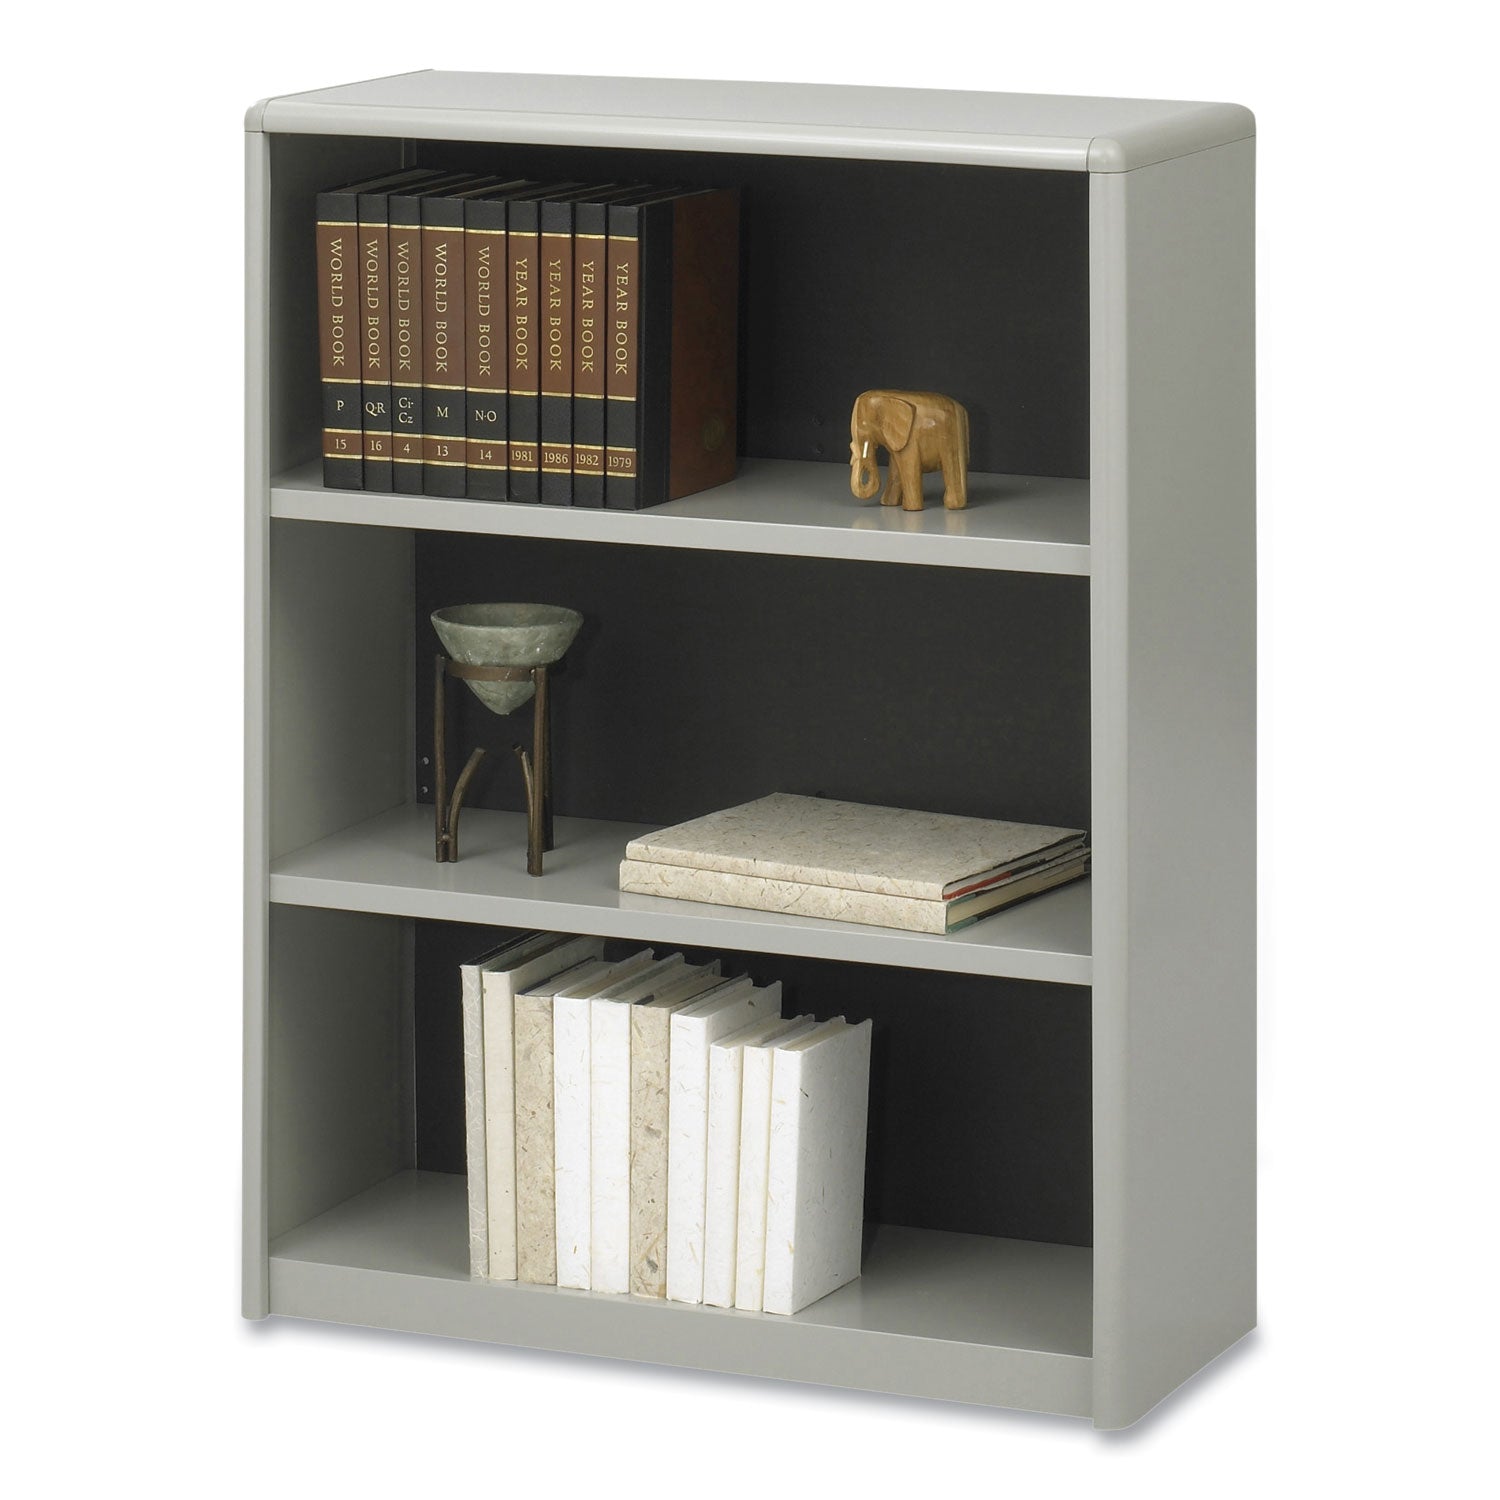 valuemate-economy-bookcase-three-shelf-3175w-x-135d-x-41h-gray-ships-in-1-3-business-days_saf7171gr - 4